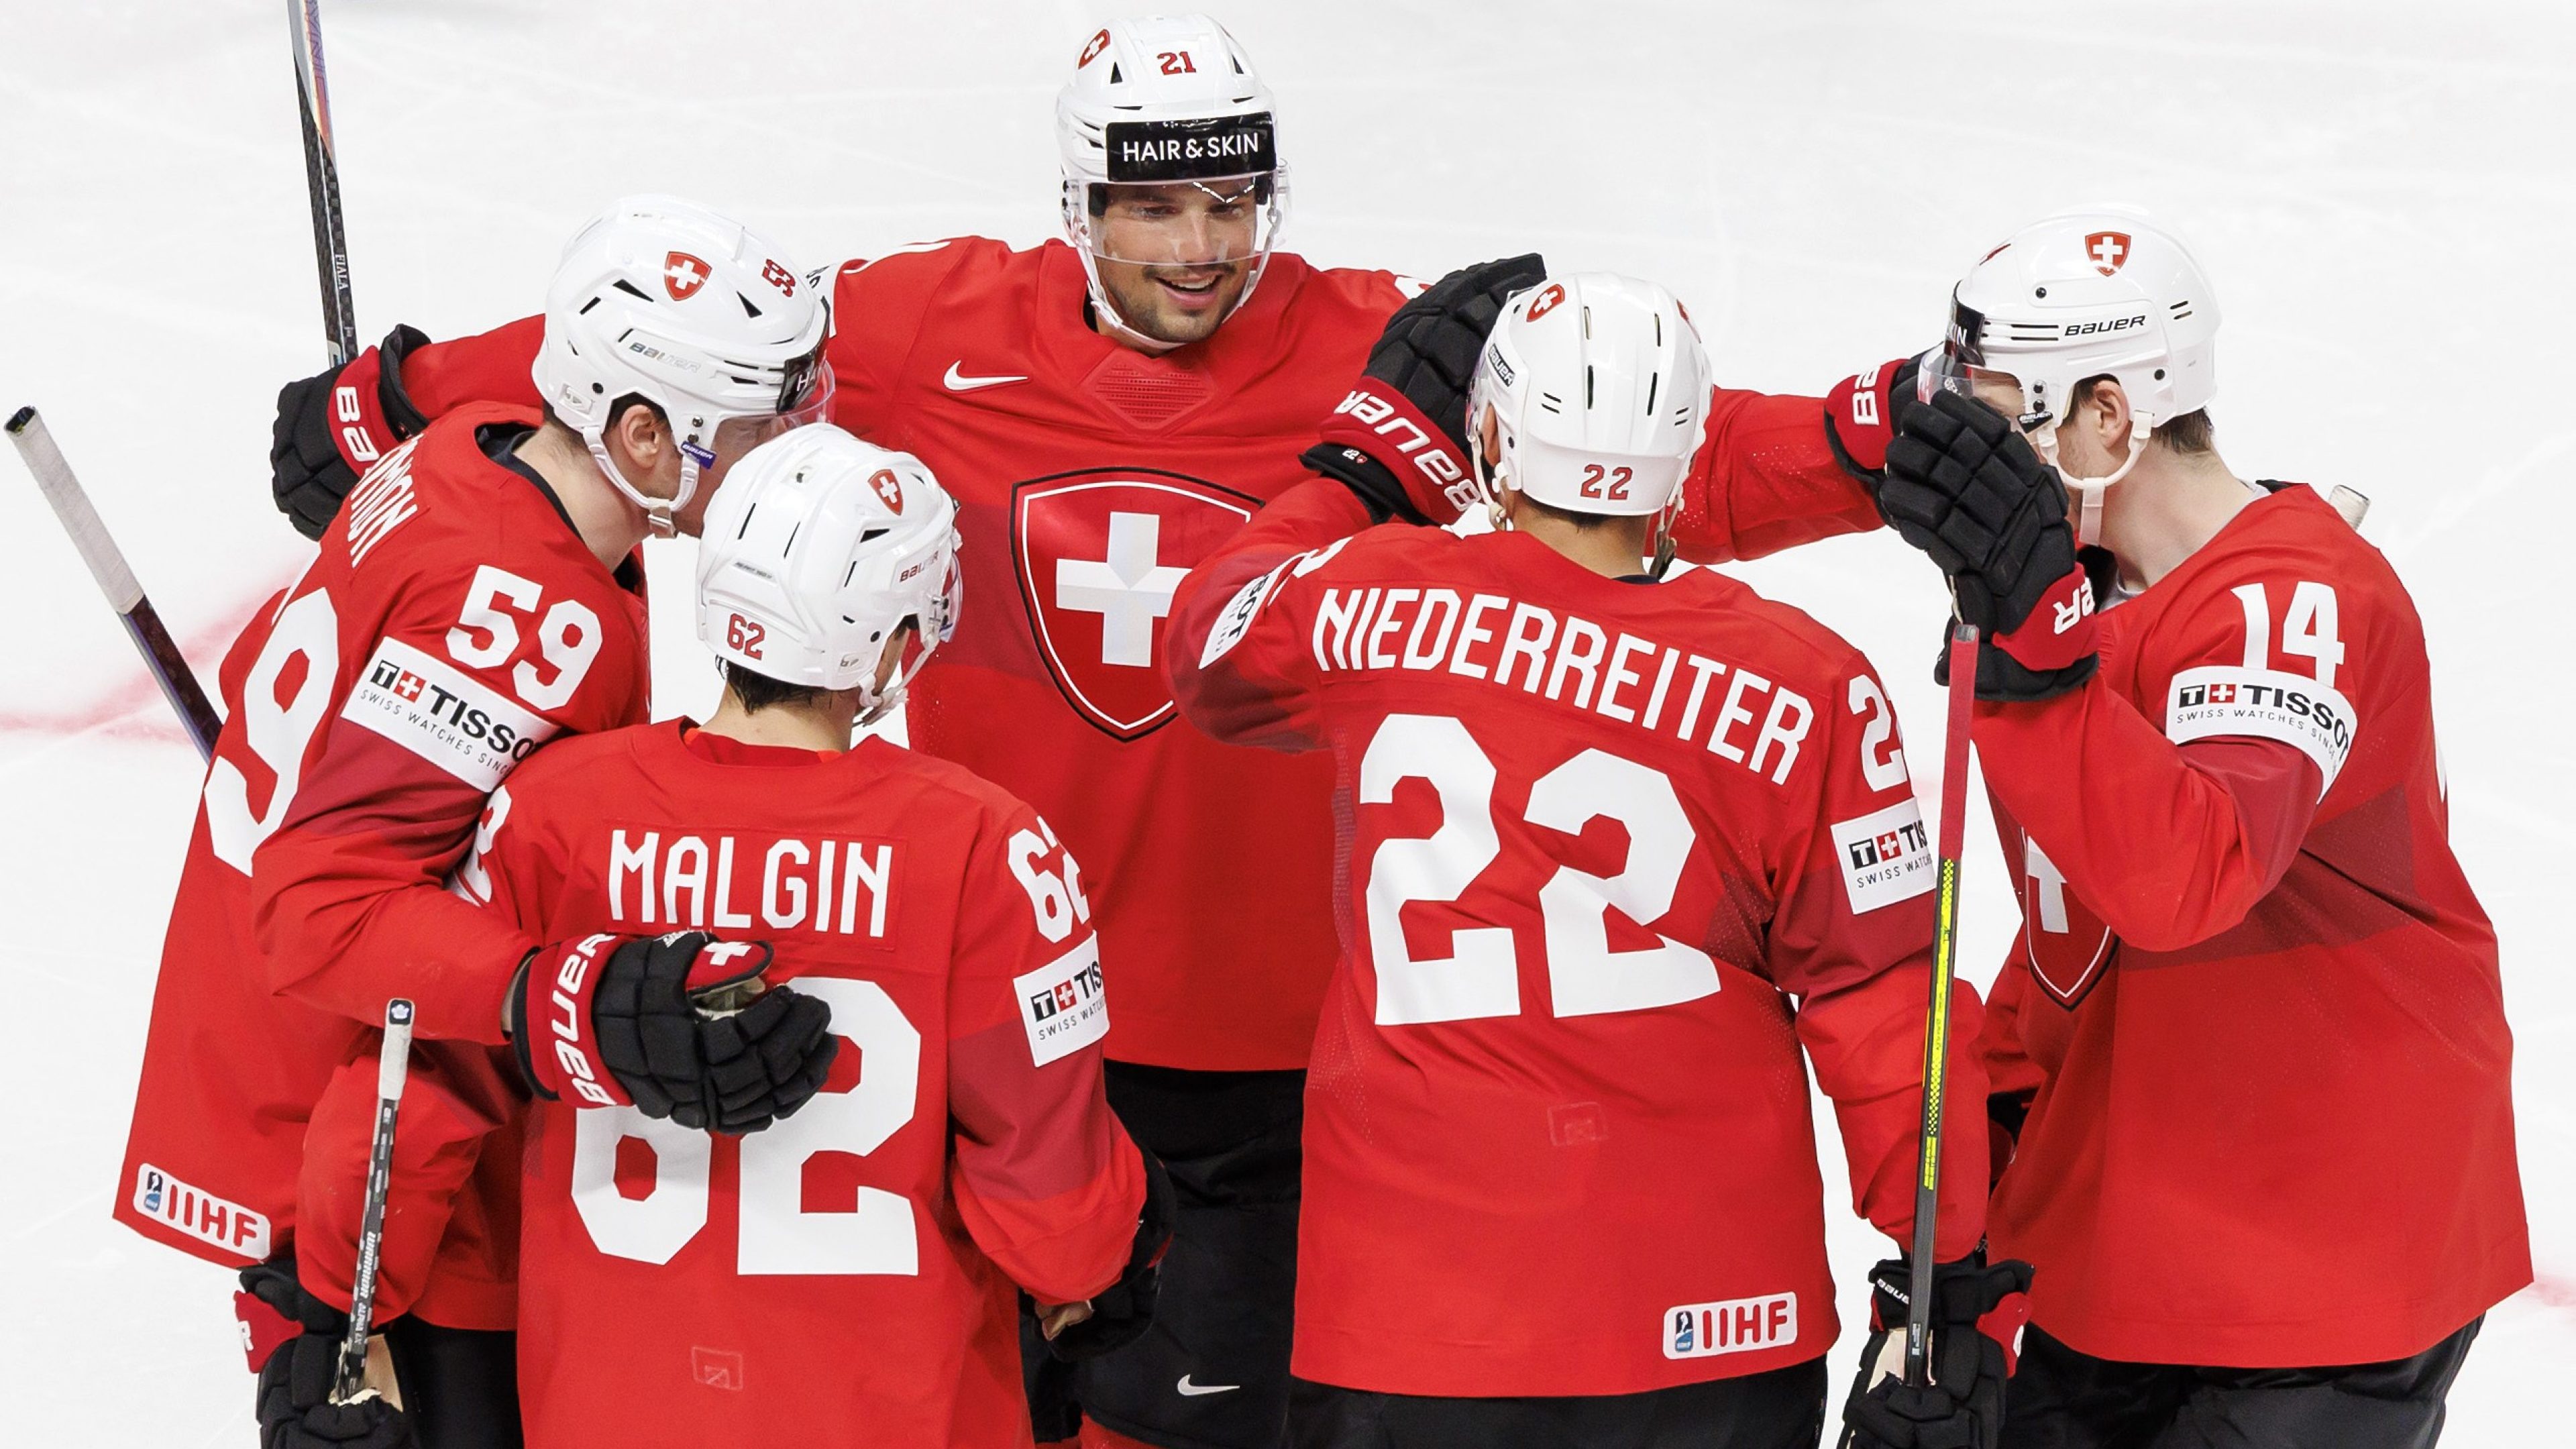 Switzerland's forward Nino Niederreiter #22 celebrates his goal with his teammates Switzerland's forward Dario Simion #59, Switzerland's forward Denis Malgin #62, Switzerland's forward Kevin Fiala #21 and Switzerland's defender Dean Kukan #14, after scoring the 4:0, during the IIHF 2023 World Championship preliminary round group B game between Switzerland and Kazakhstan, at the Riga Arena, in Riga, Latvia, Tuesday, May 16, 2023. (KEYSTONE/Salvatore Di Nolfi)